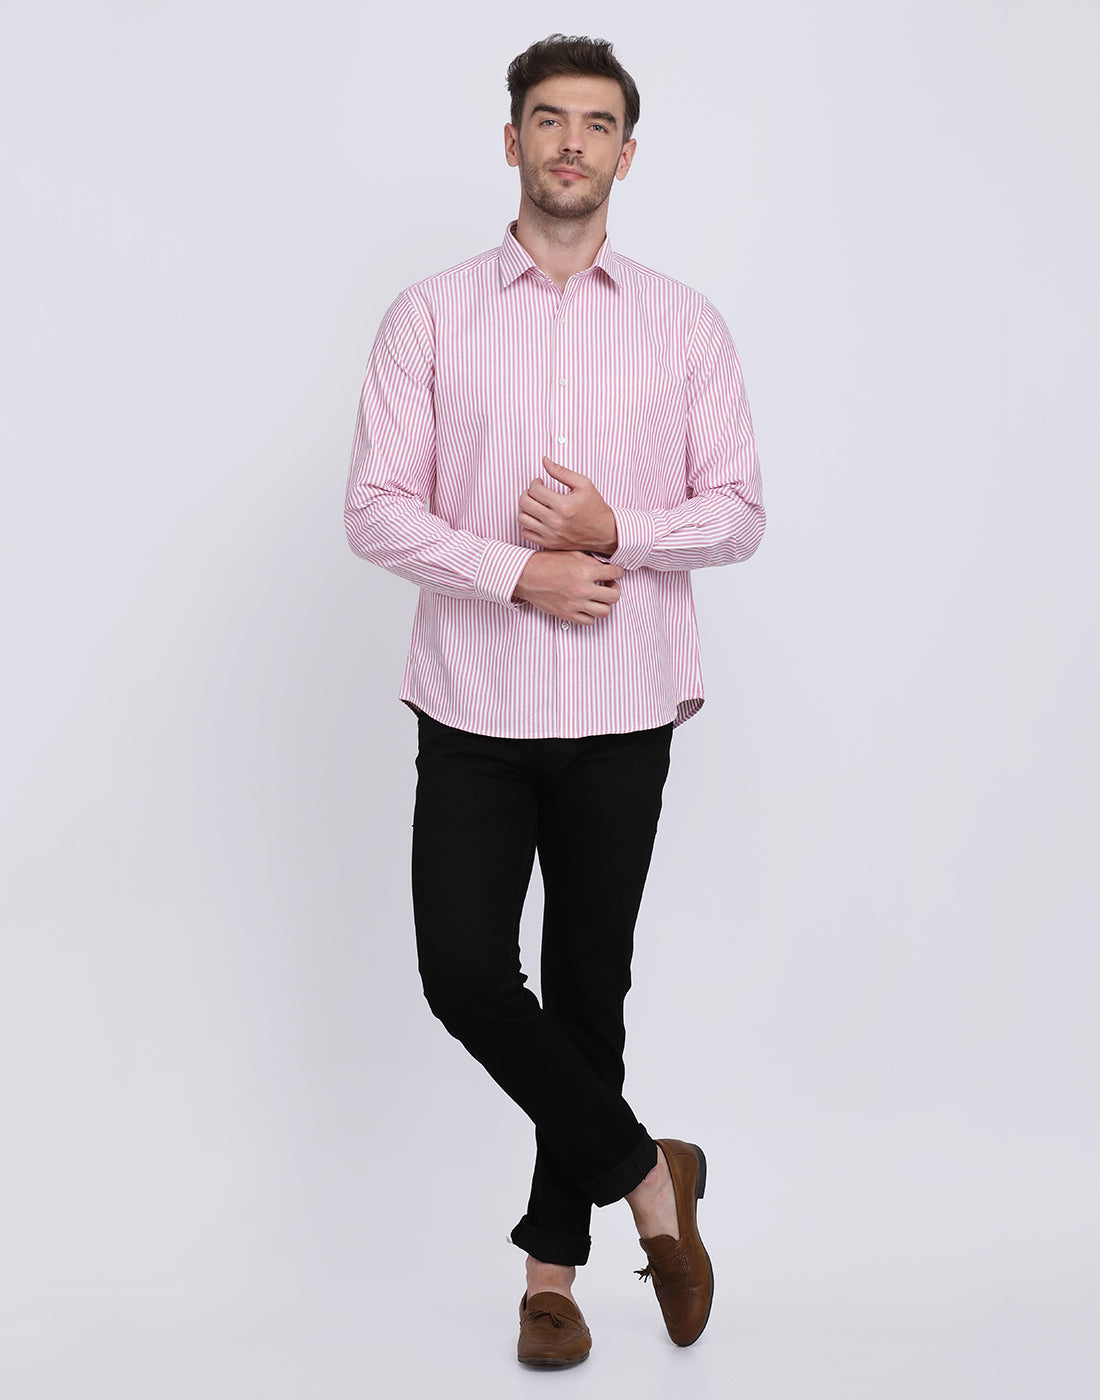 Cotton oxford Casual pink & white striped Shirt